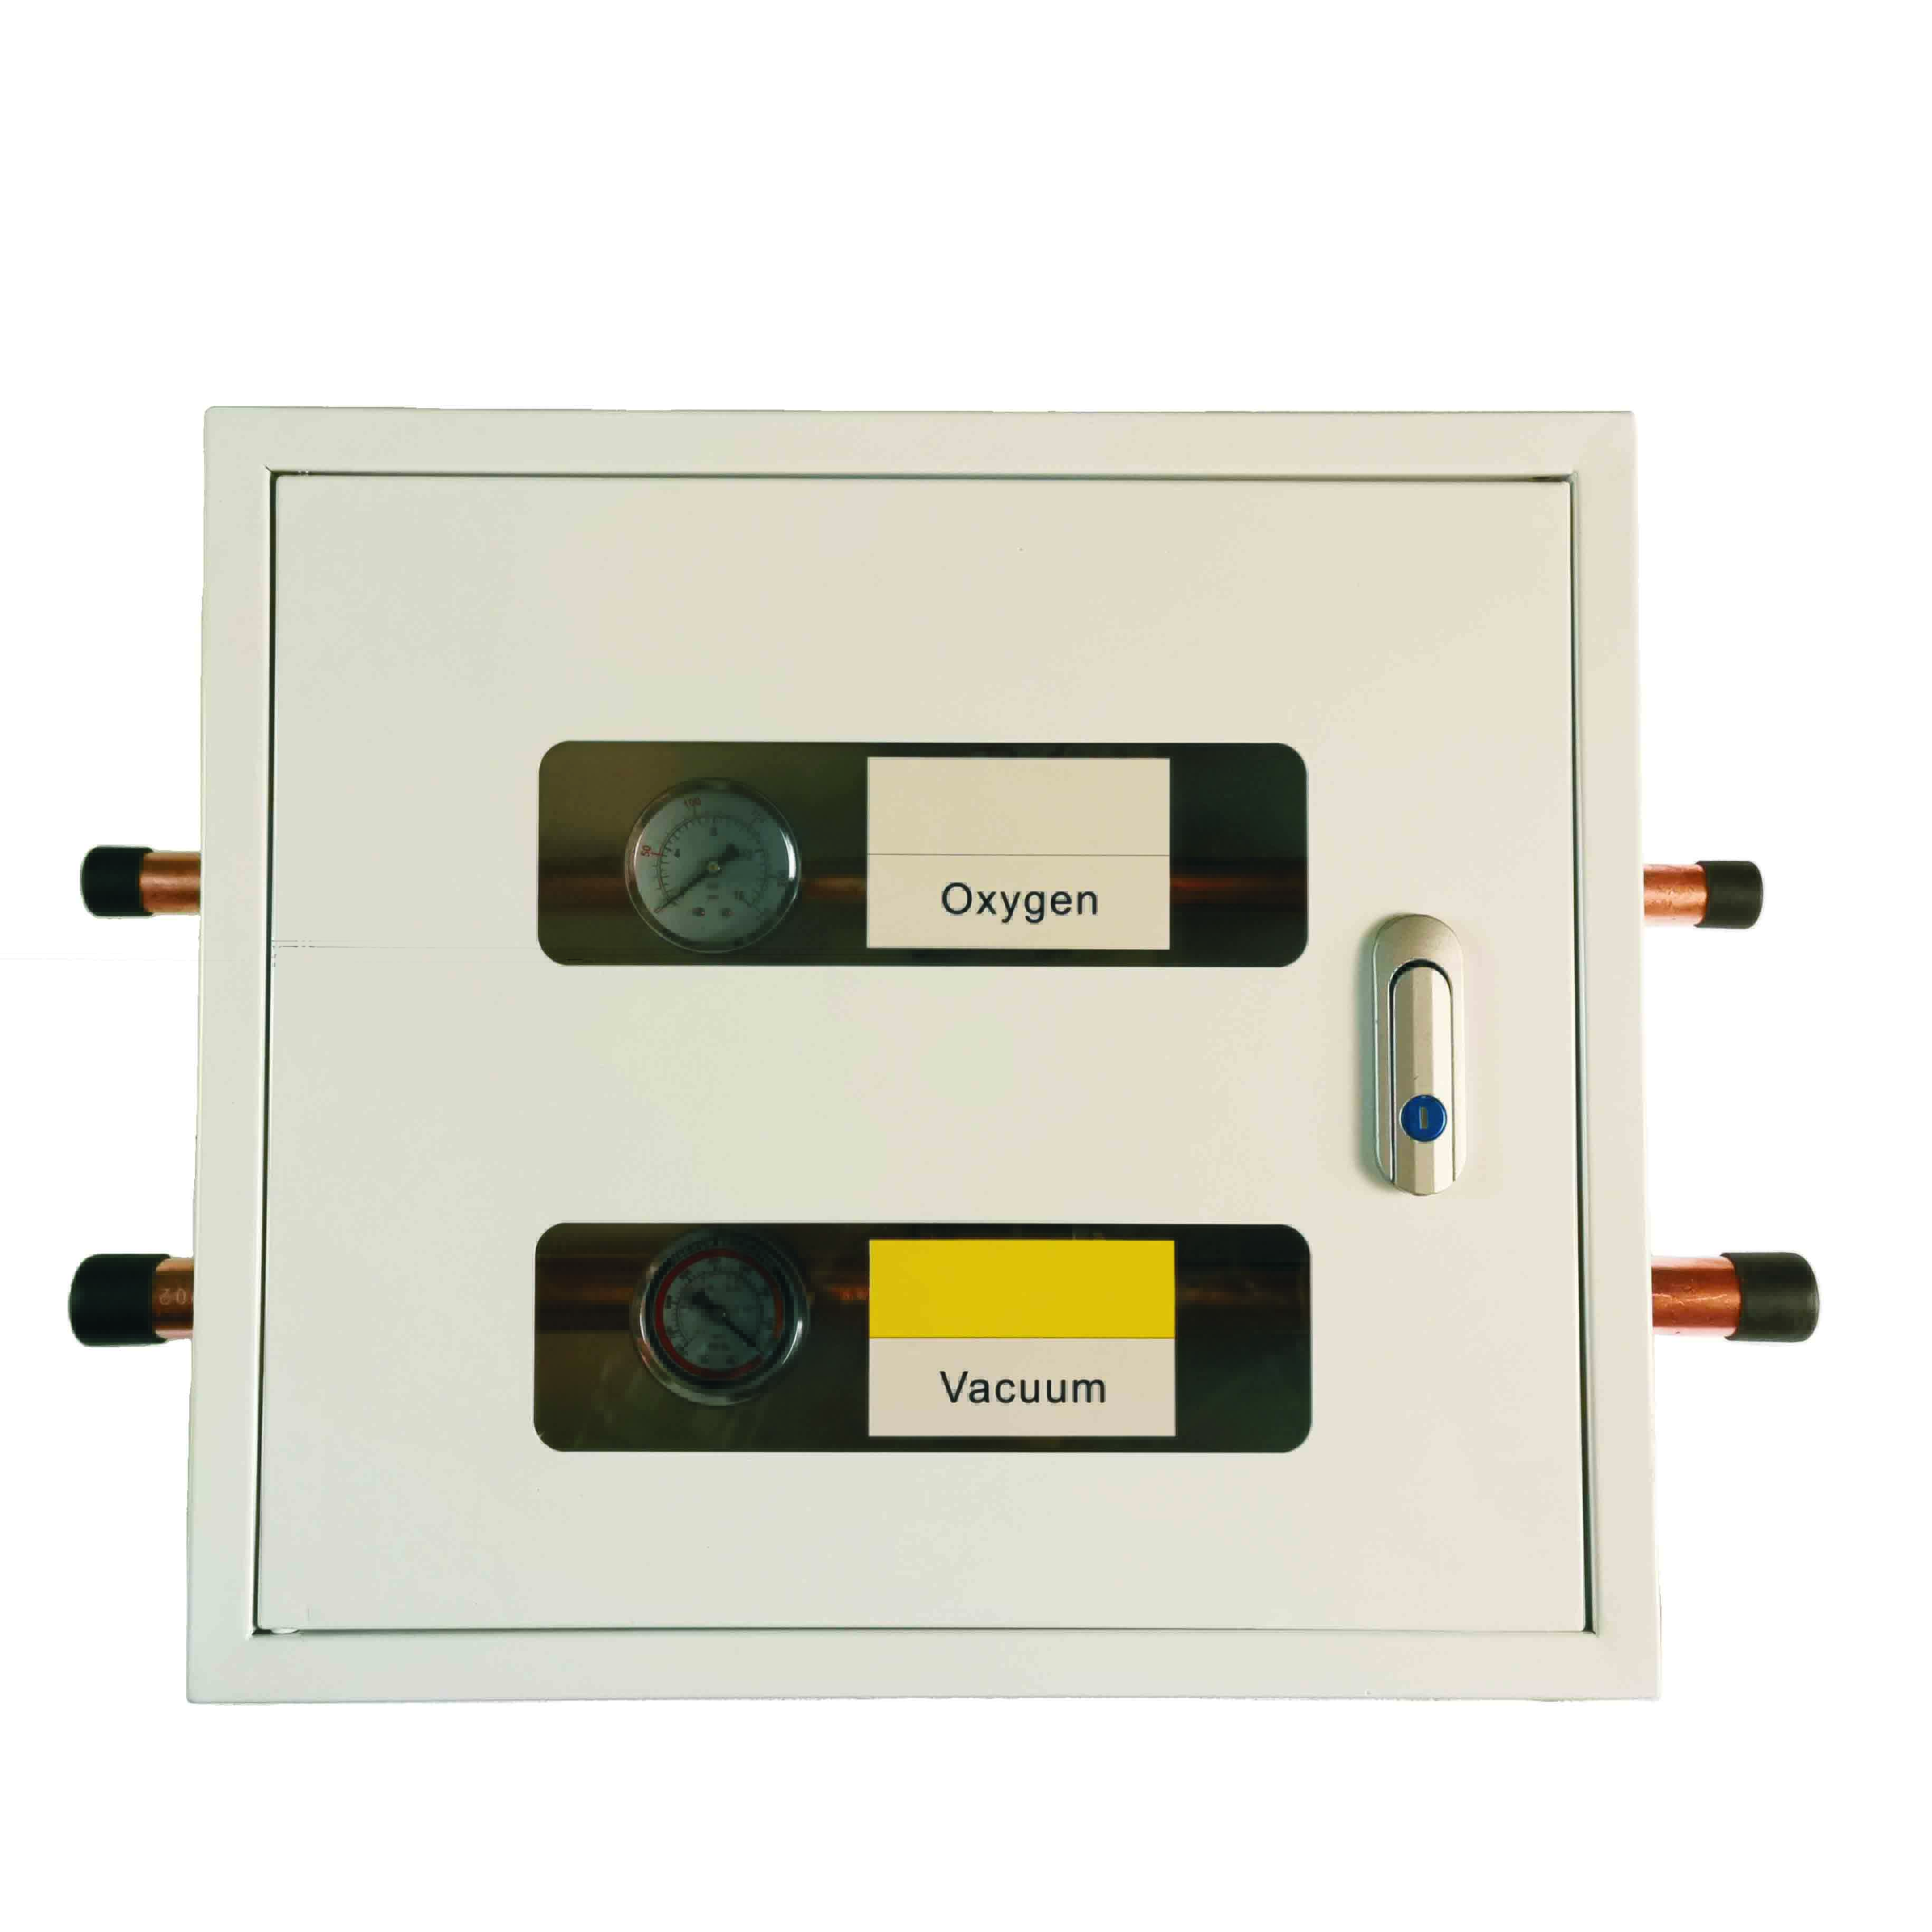 Two Pipes Medical Gas Zone Alarm Valve Box